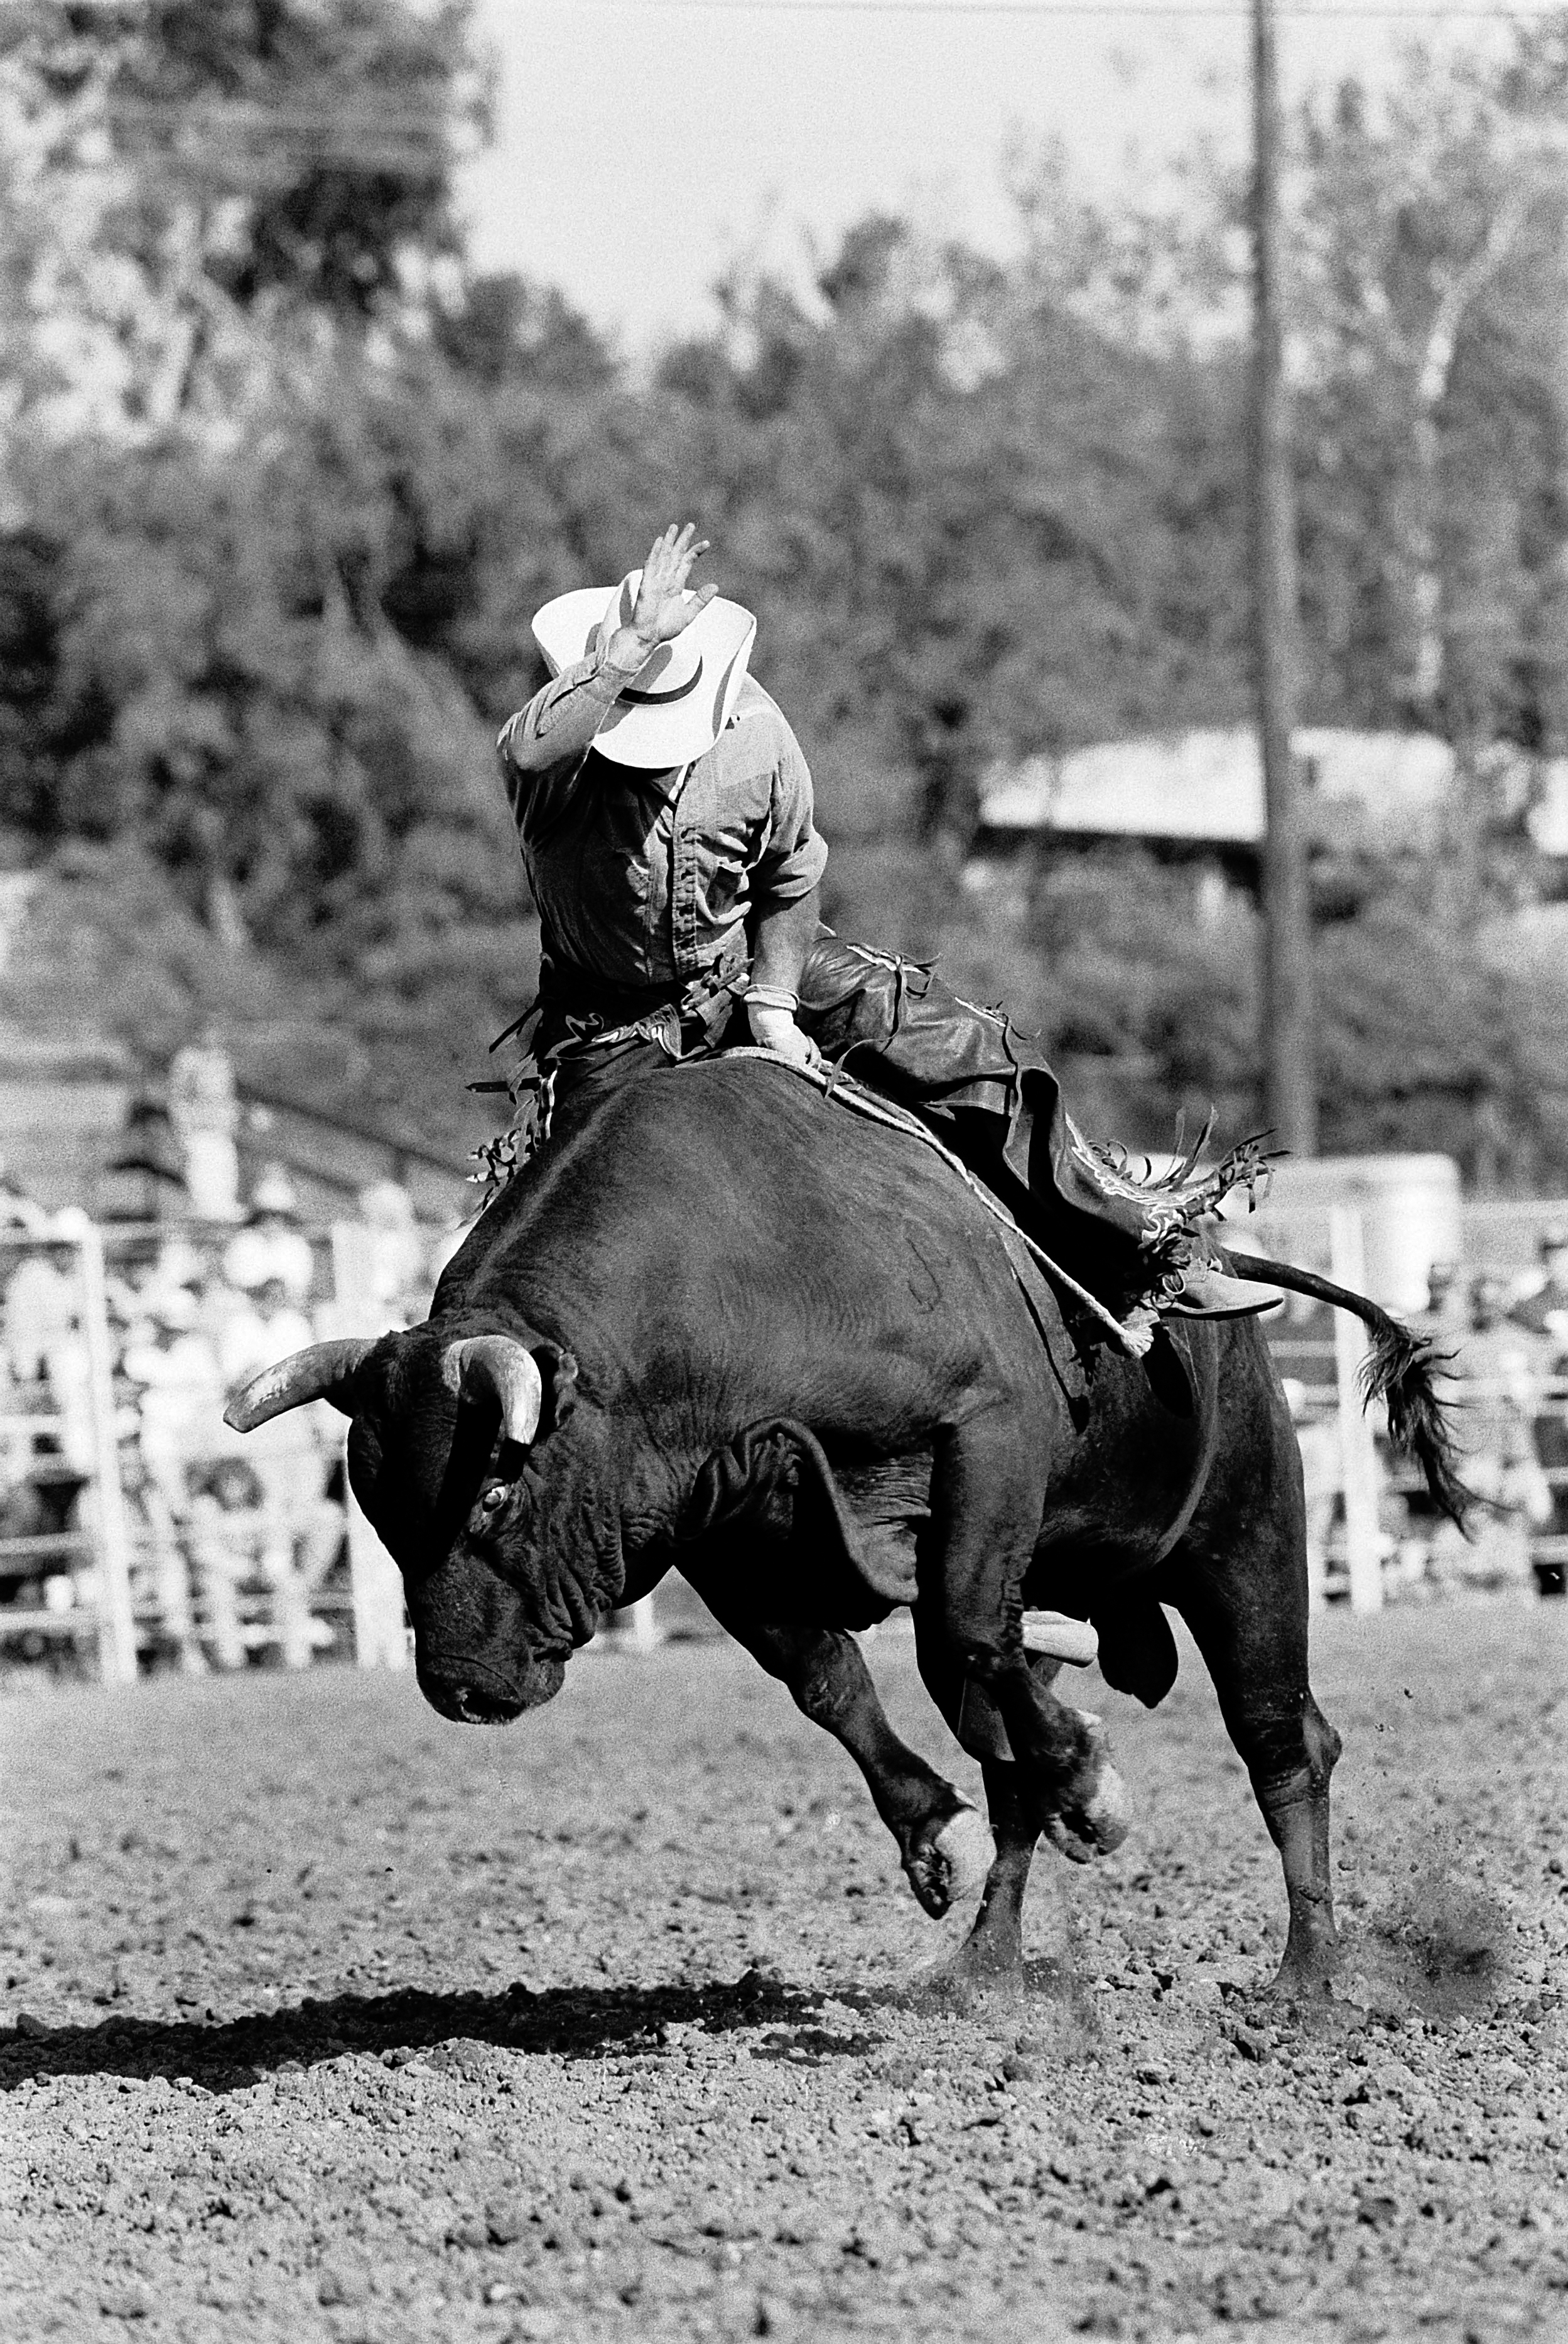 KWS Torres ruiding a bull during rodeo